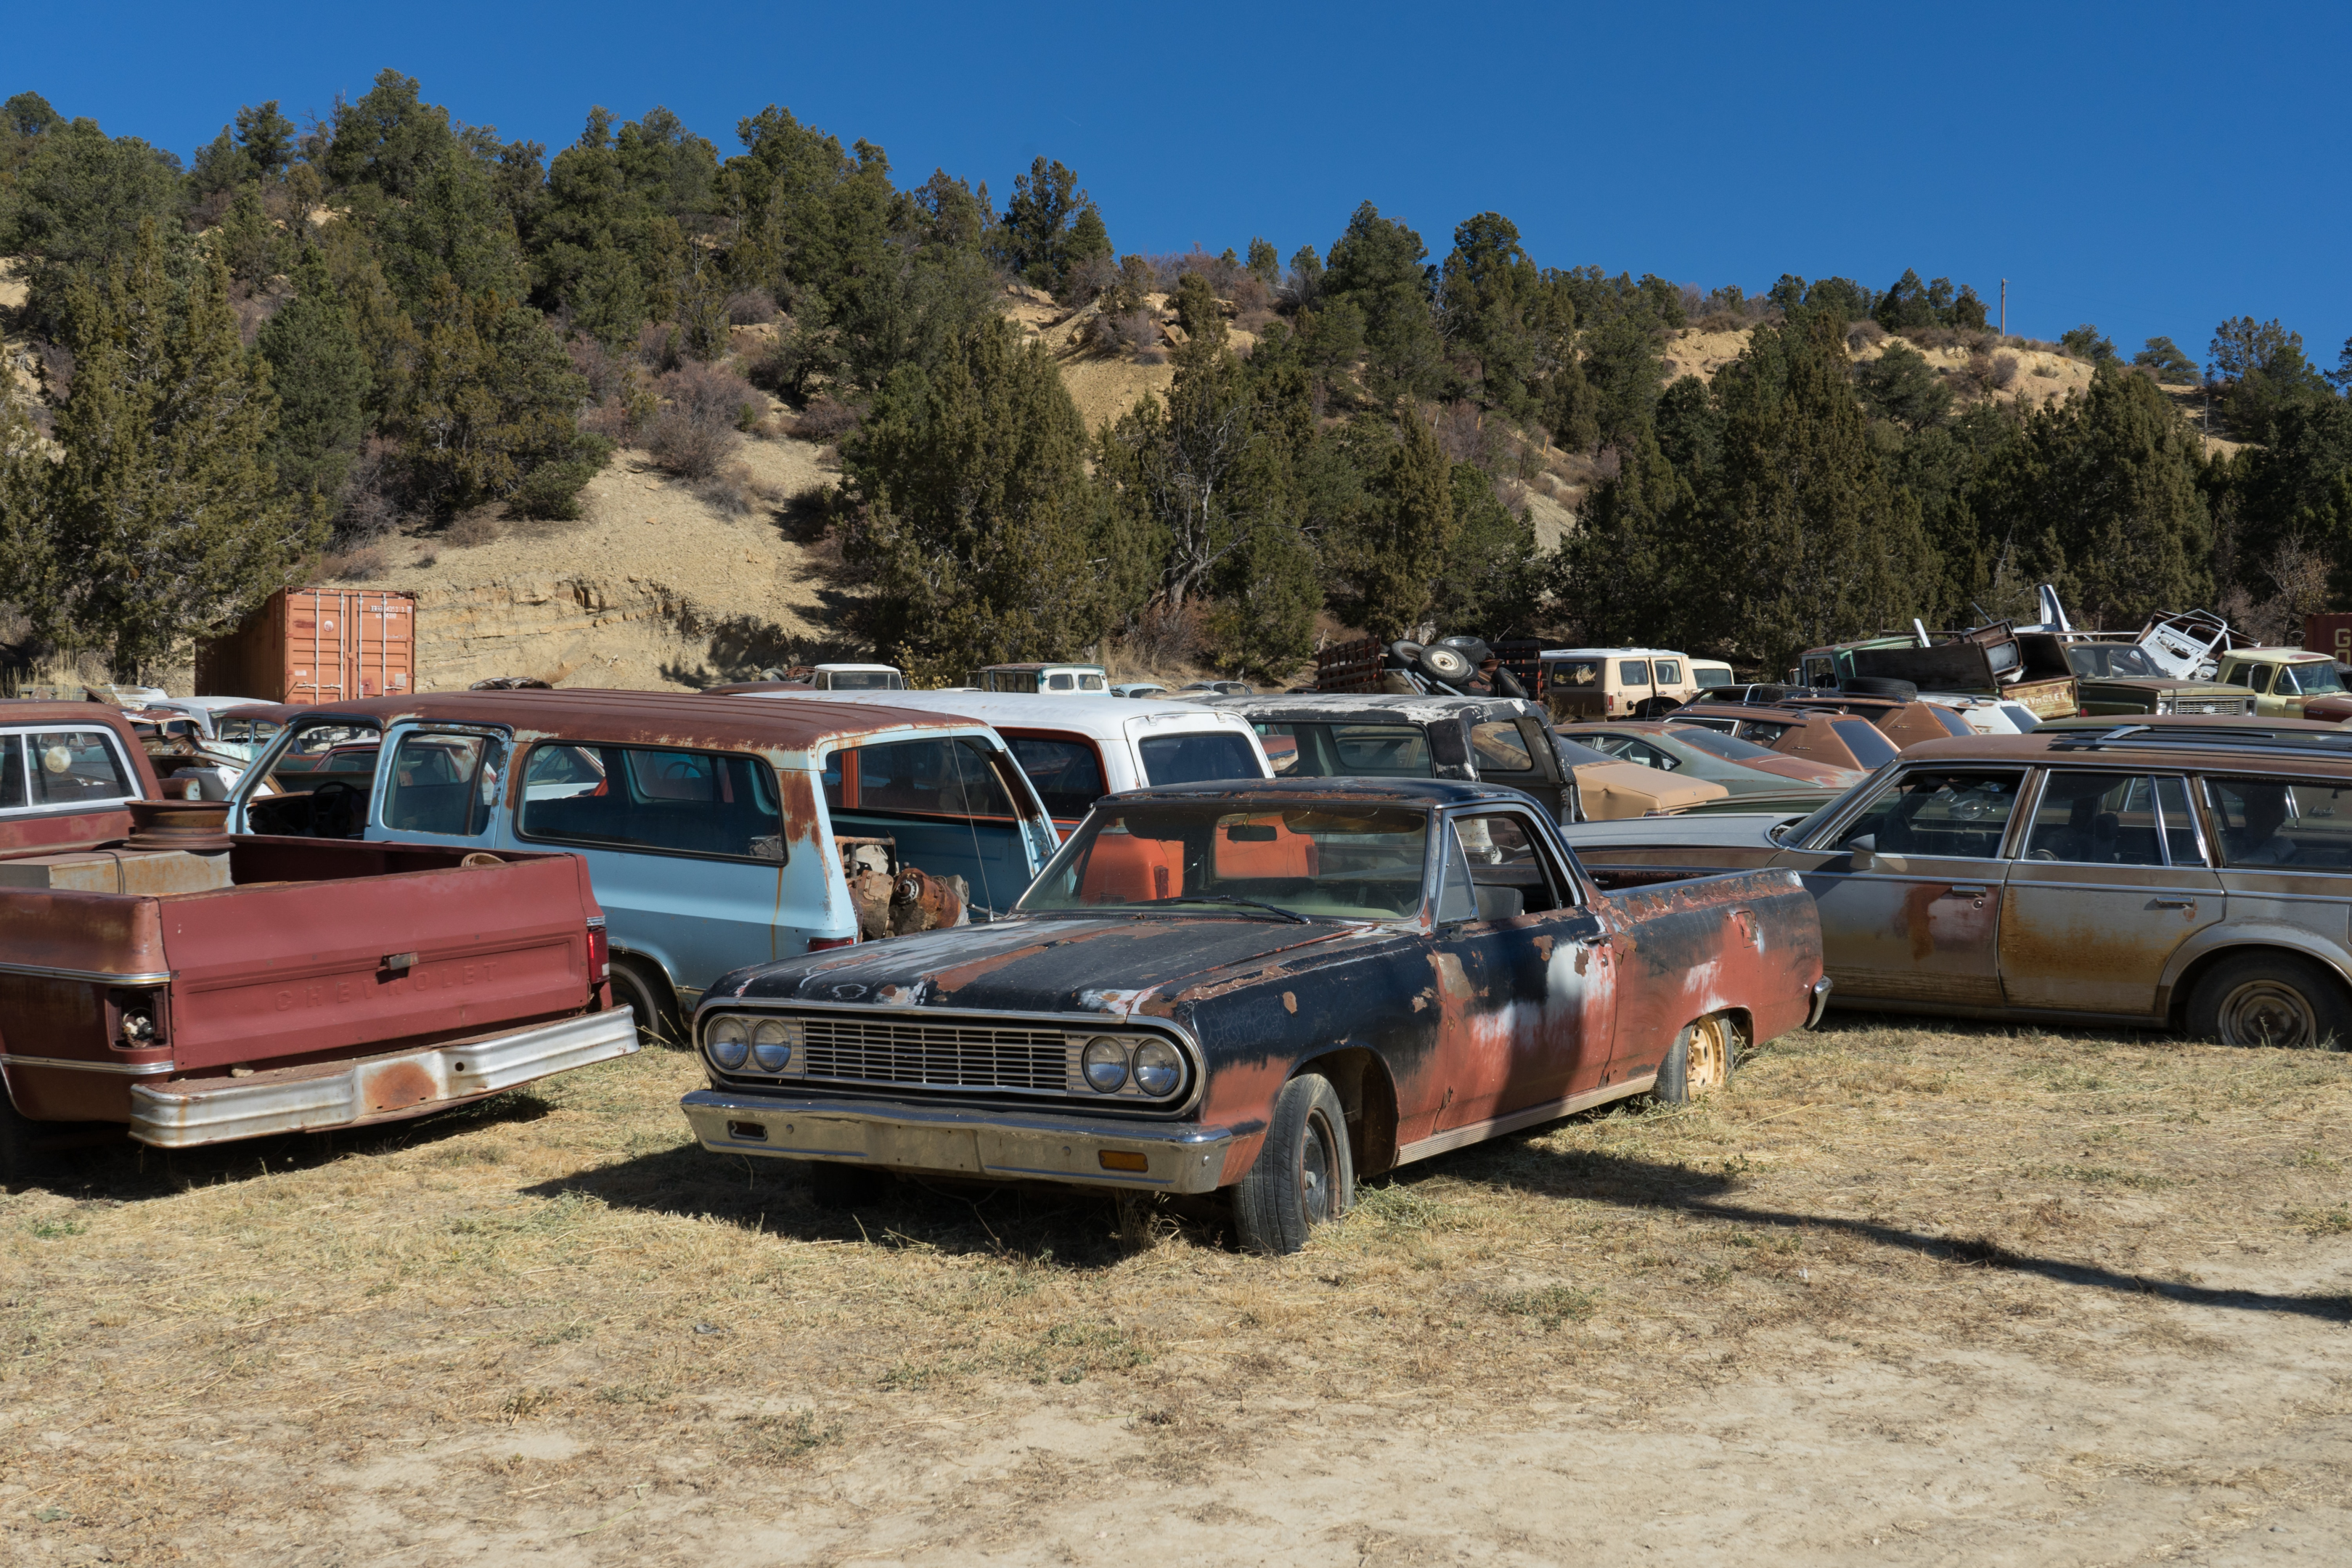 Cash from unwanted cars in a junkyard